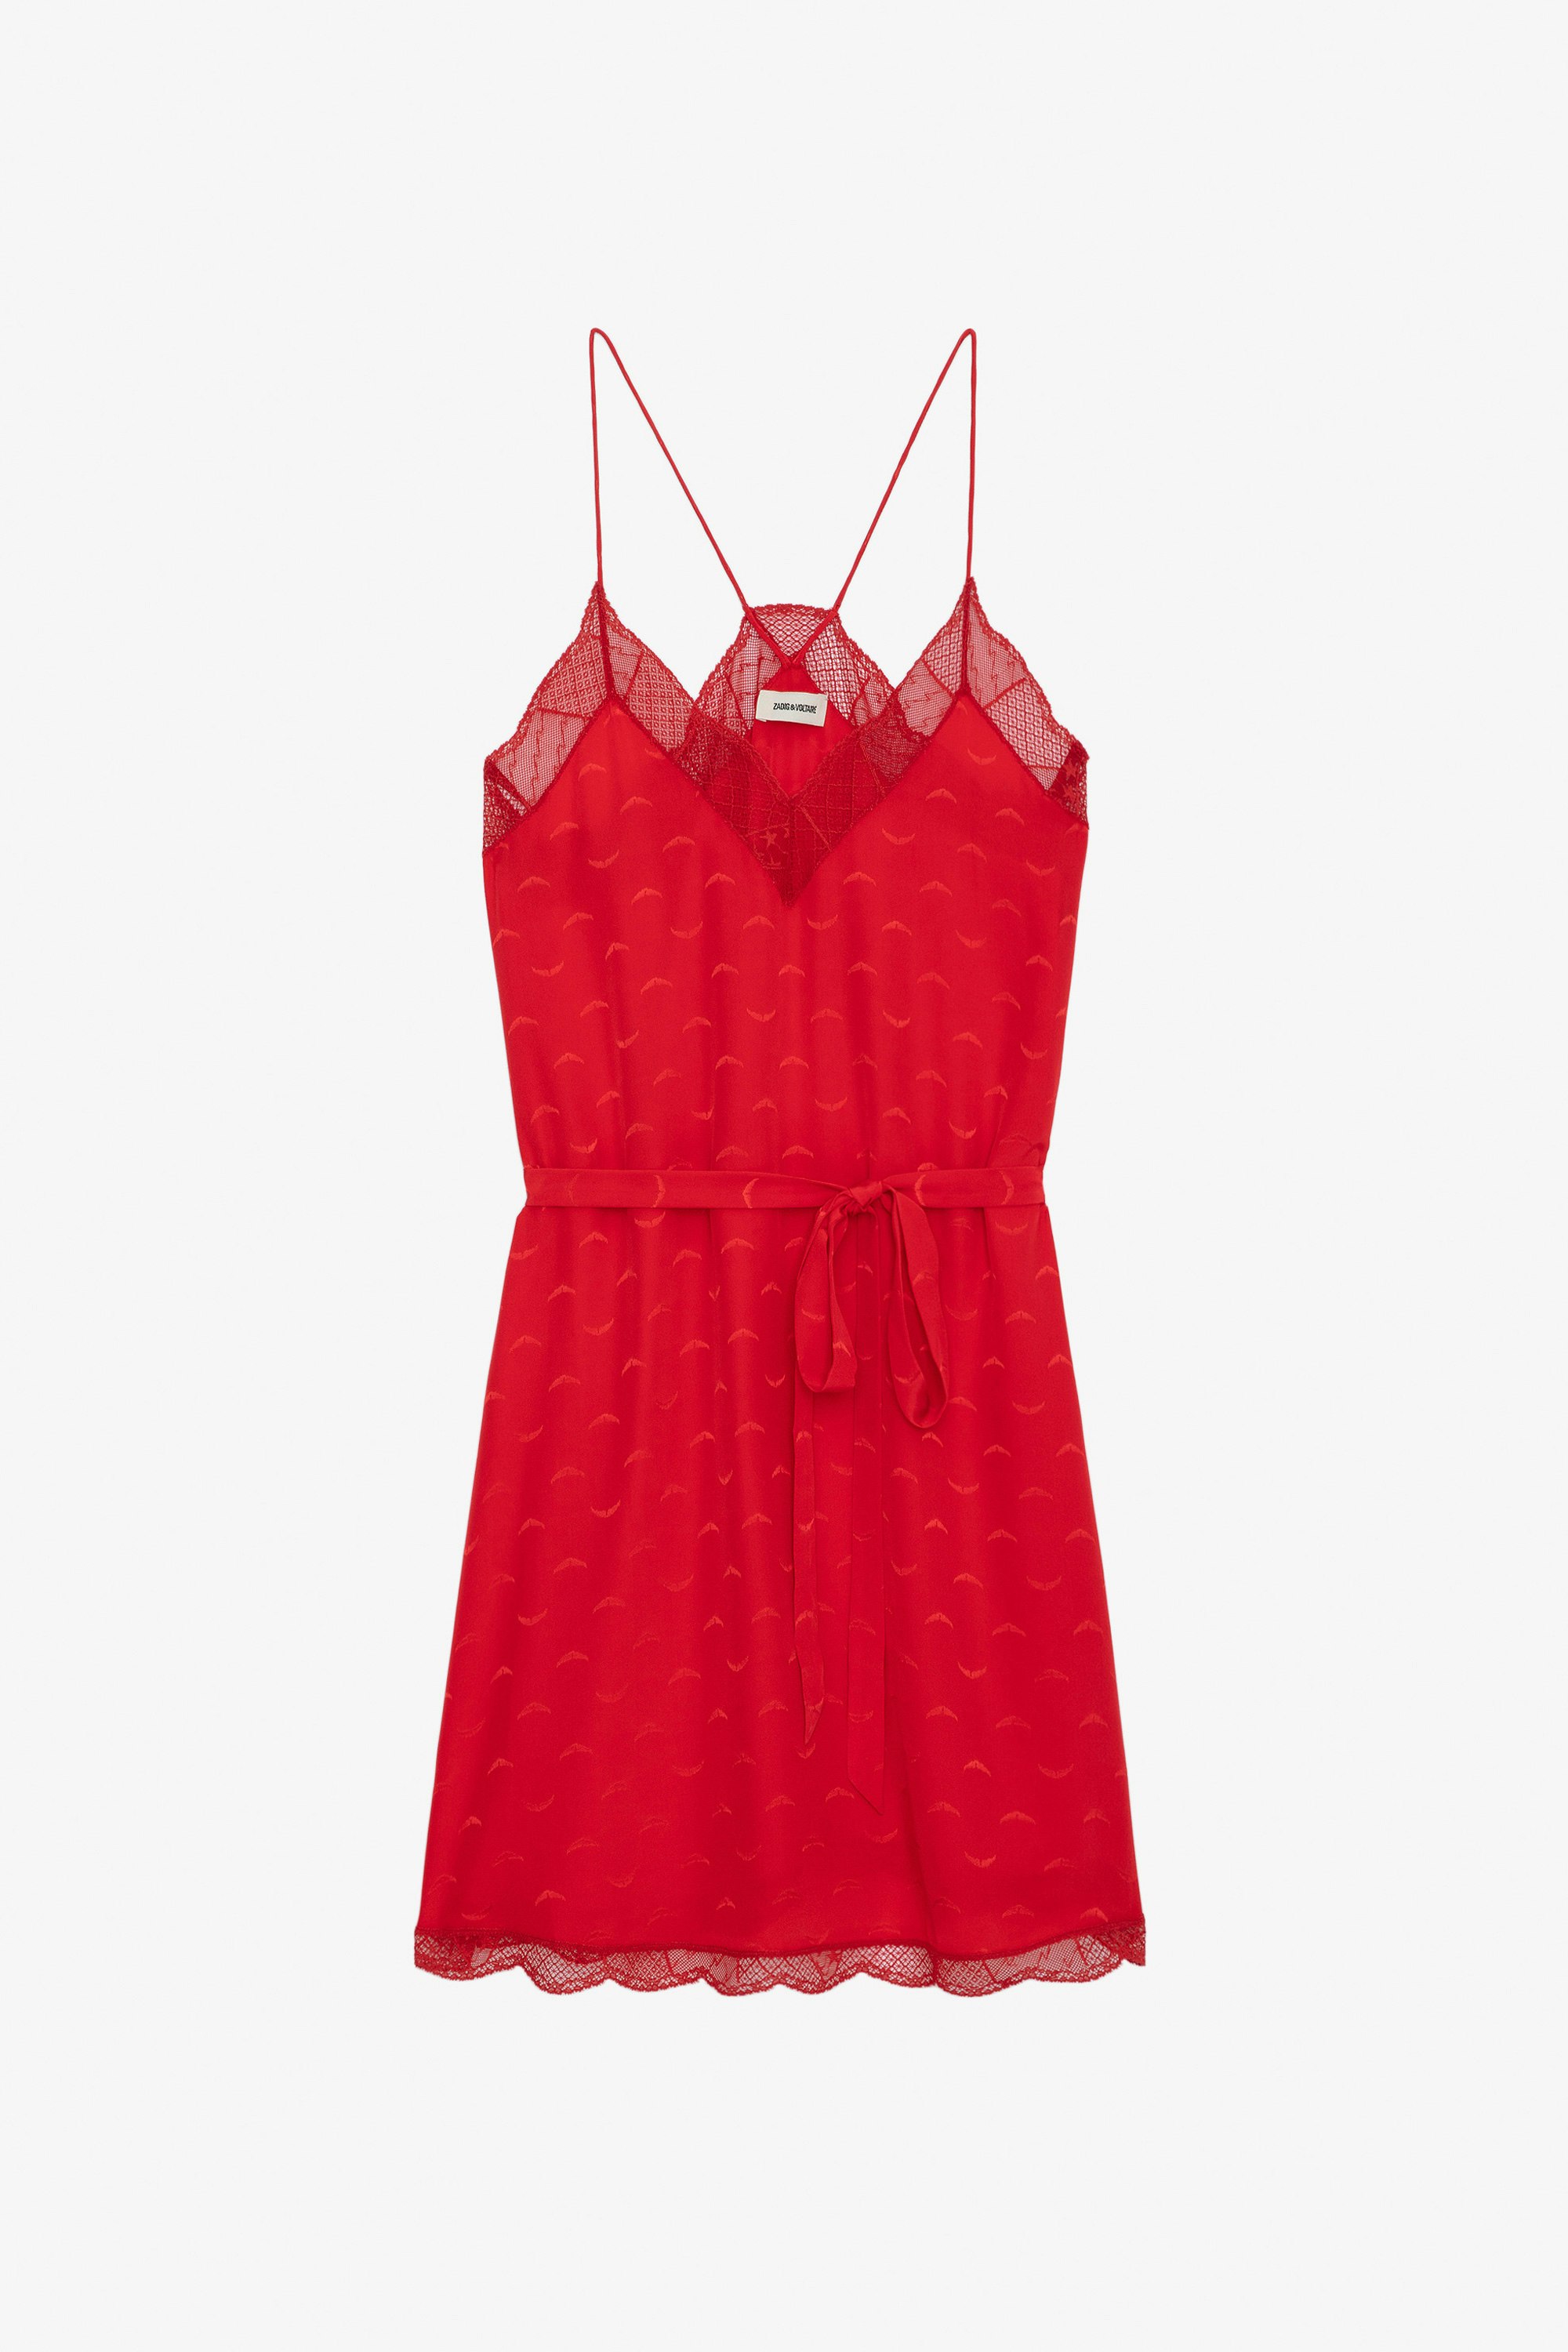 Ristyz Silk Jacquard Dress - Short red silk dress with jacquard wings and lace, tied at the waist.